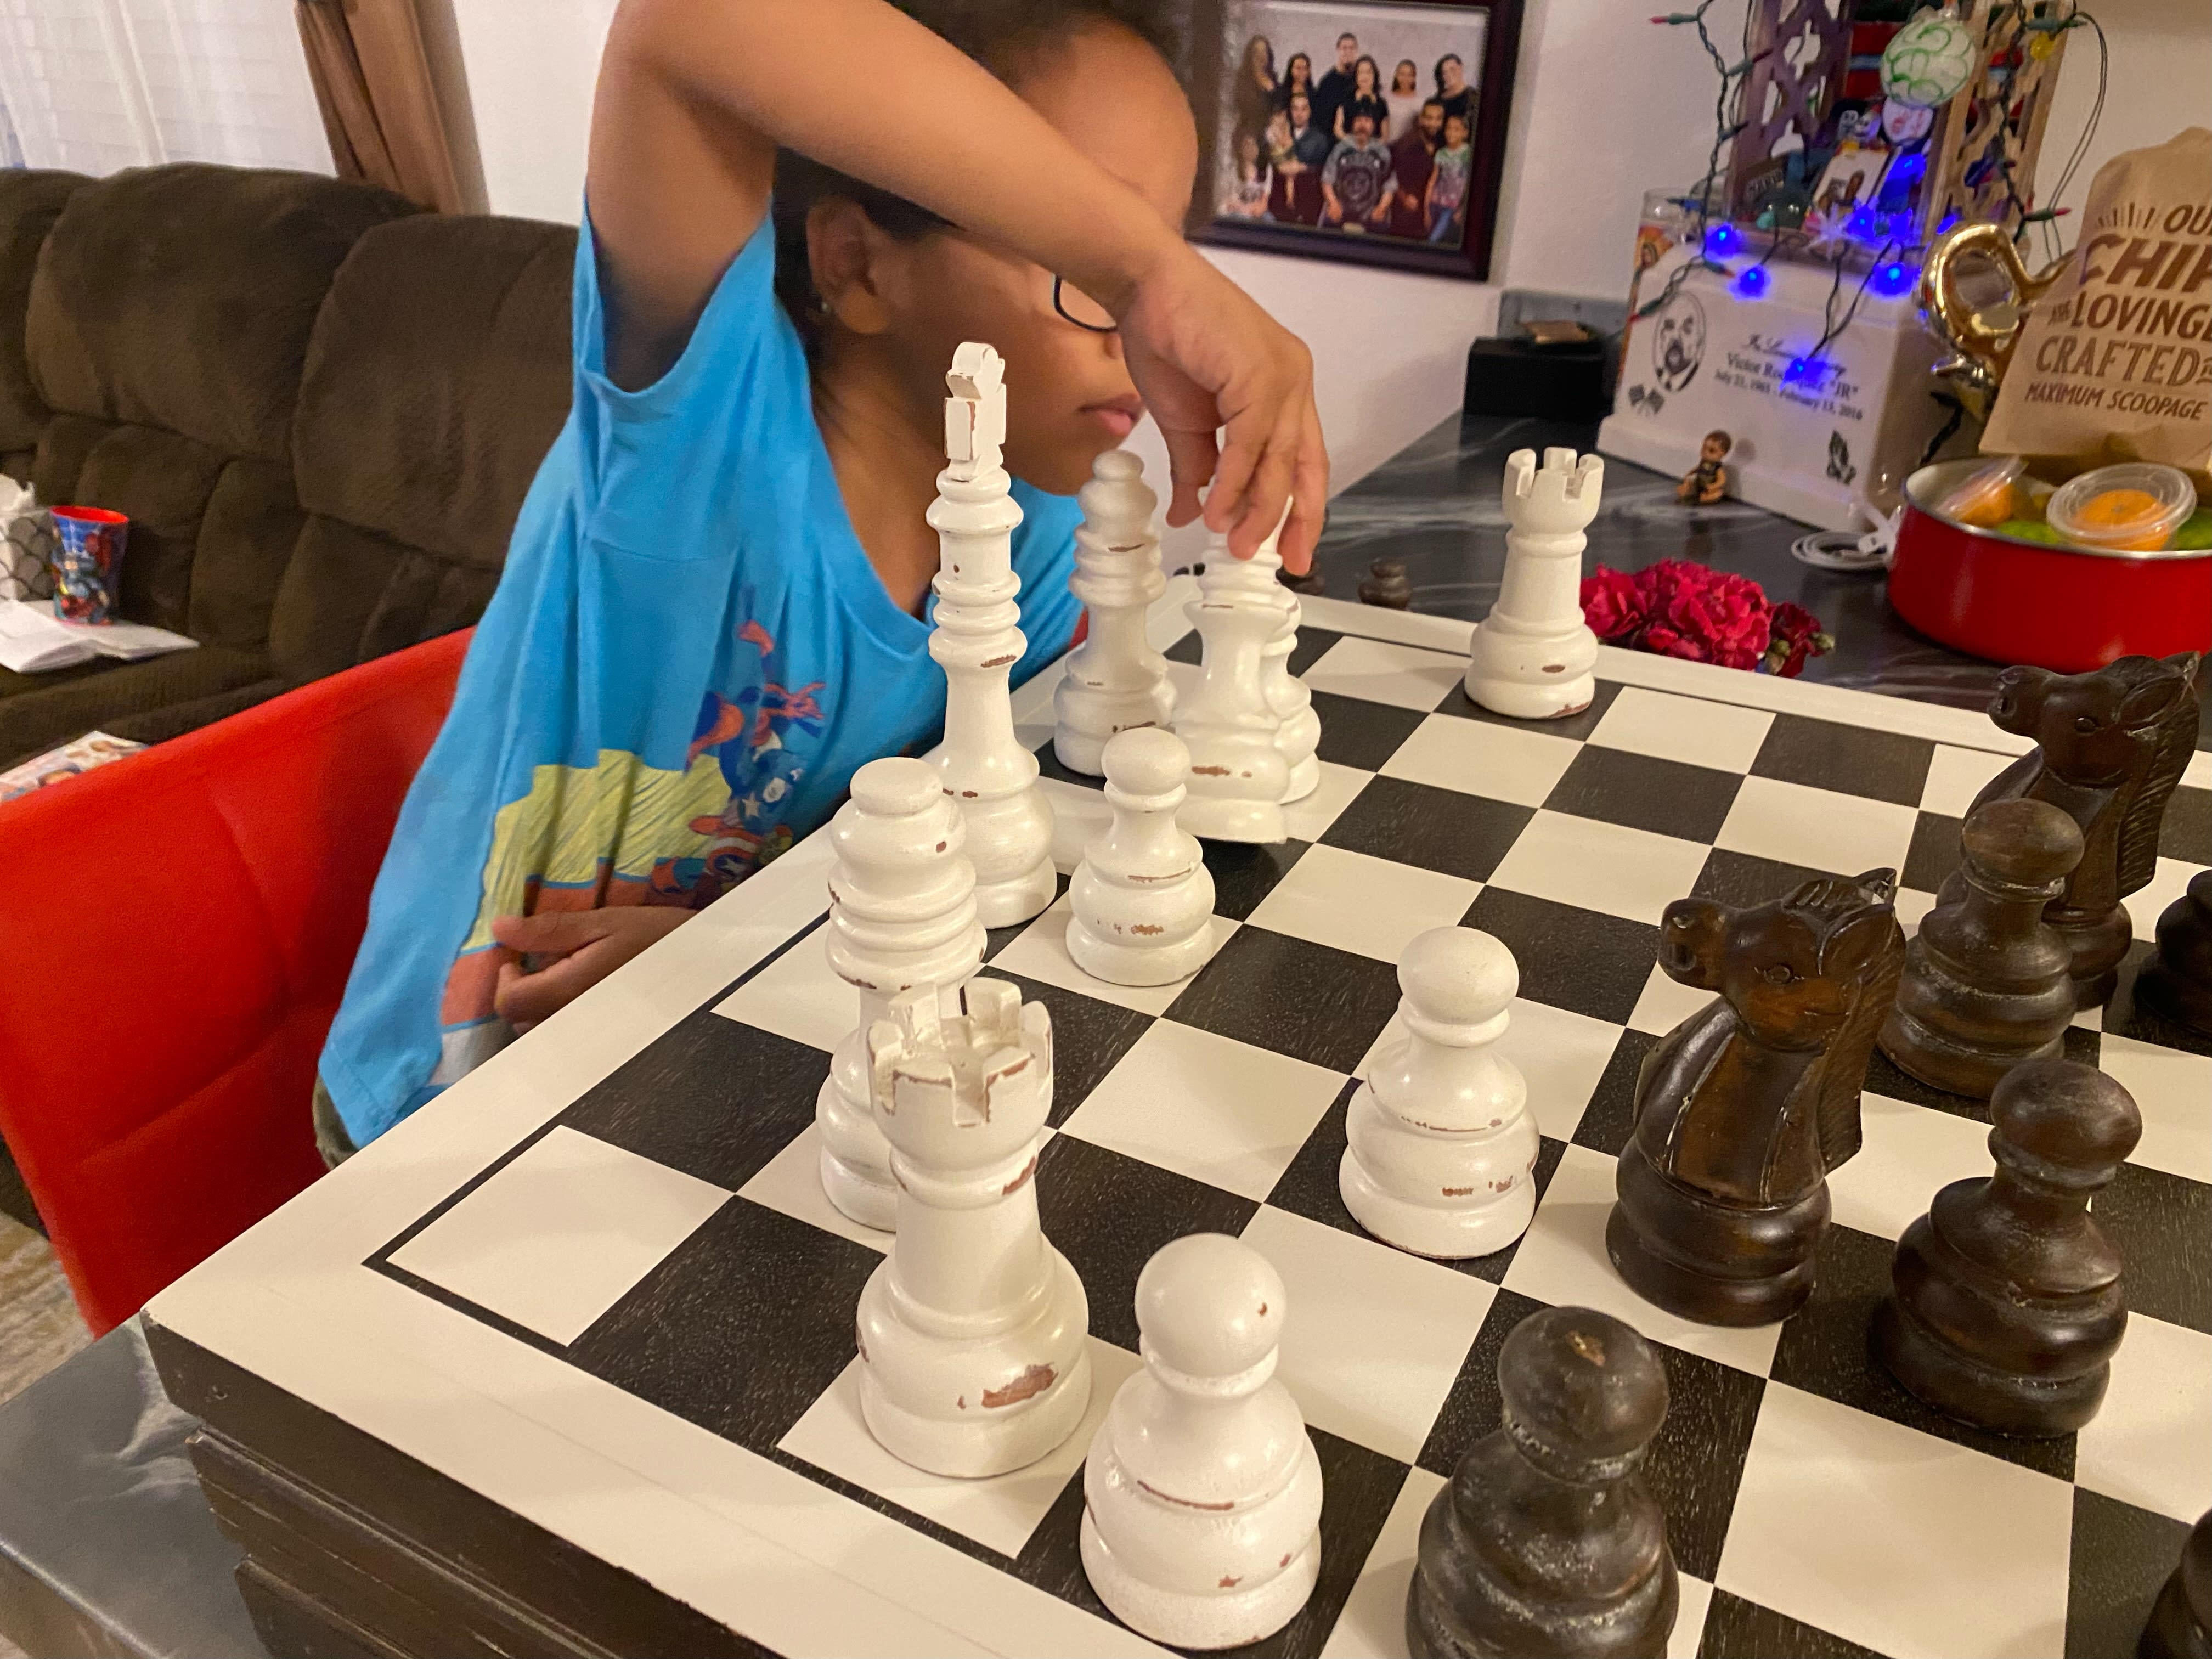 Boston Center for Independent Living - Are you a chess player? BCIL is  looking for chess players for a possible fundraising tournament. All skill  levels accepted. Email Susan at ssmith@bostoncil.org if you